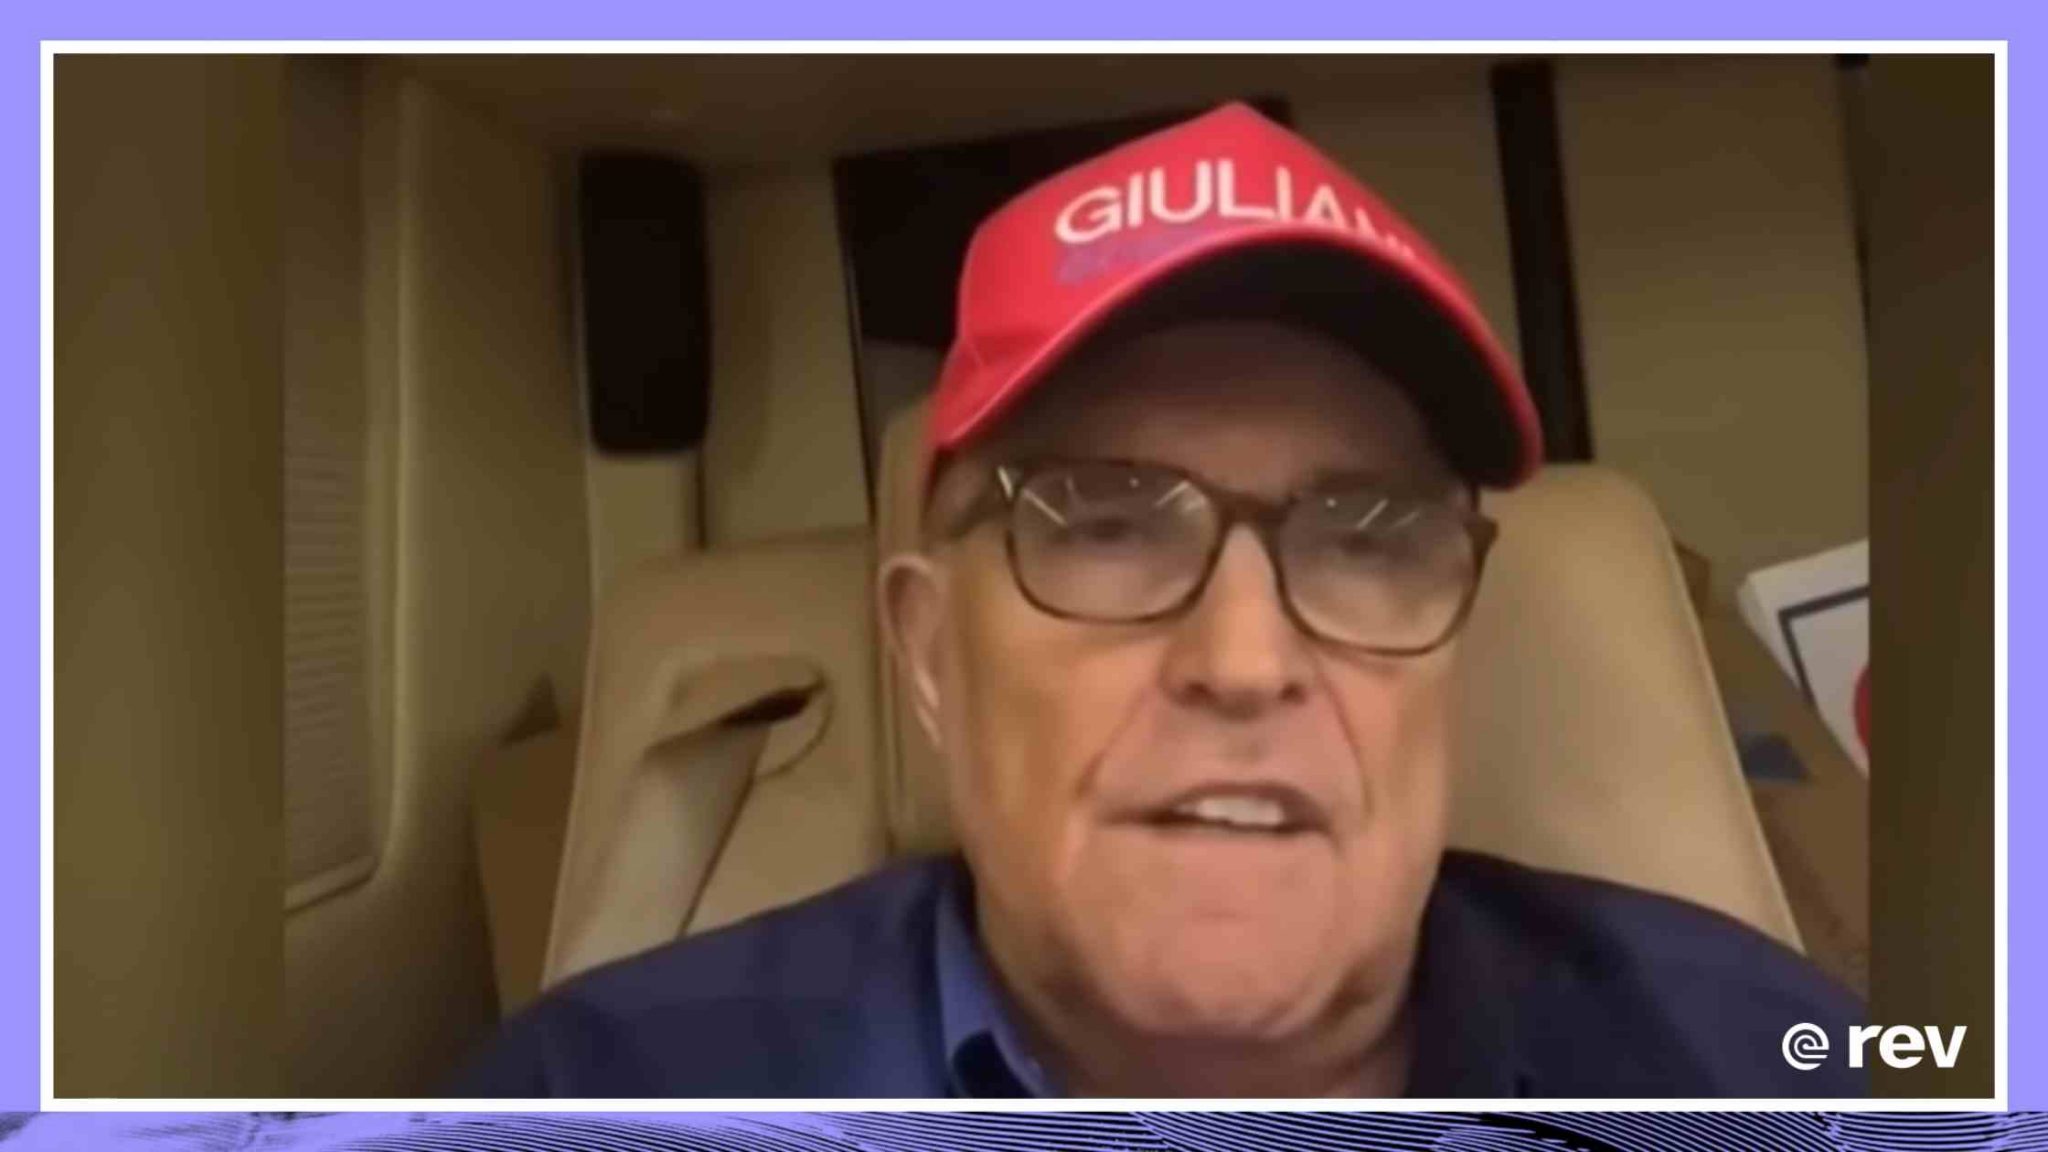 Staten Island man charged after allegedly slapping Rudy Giuliani 6/26/22 Transcript